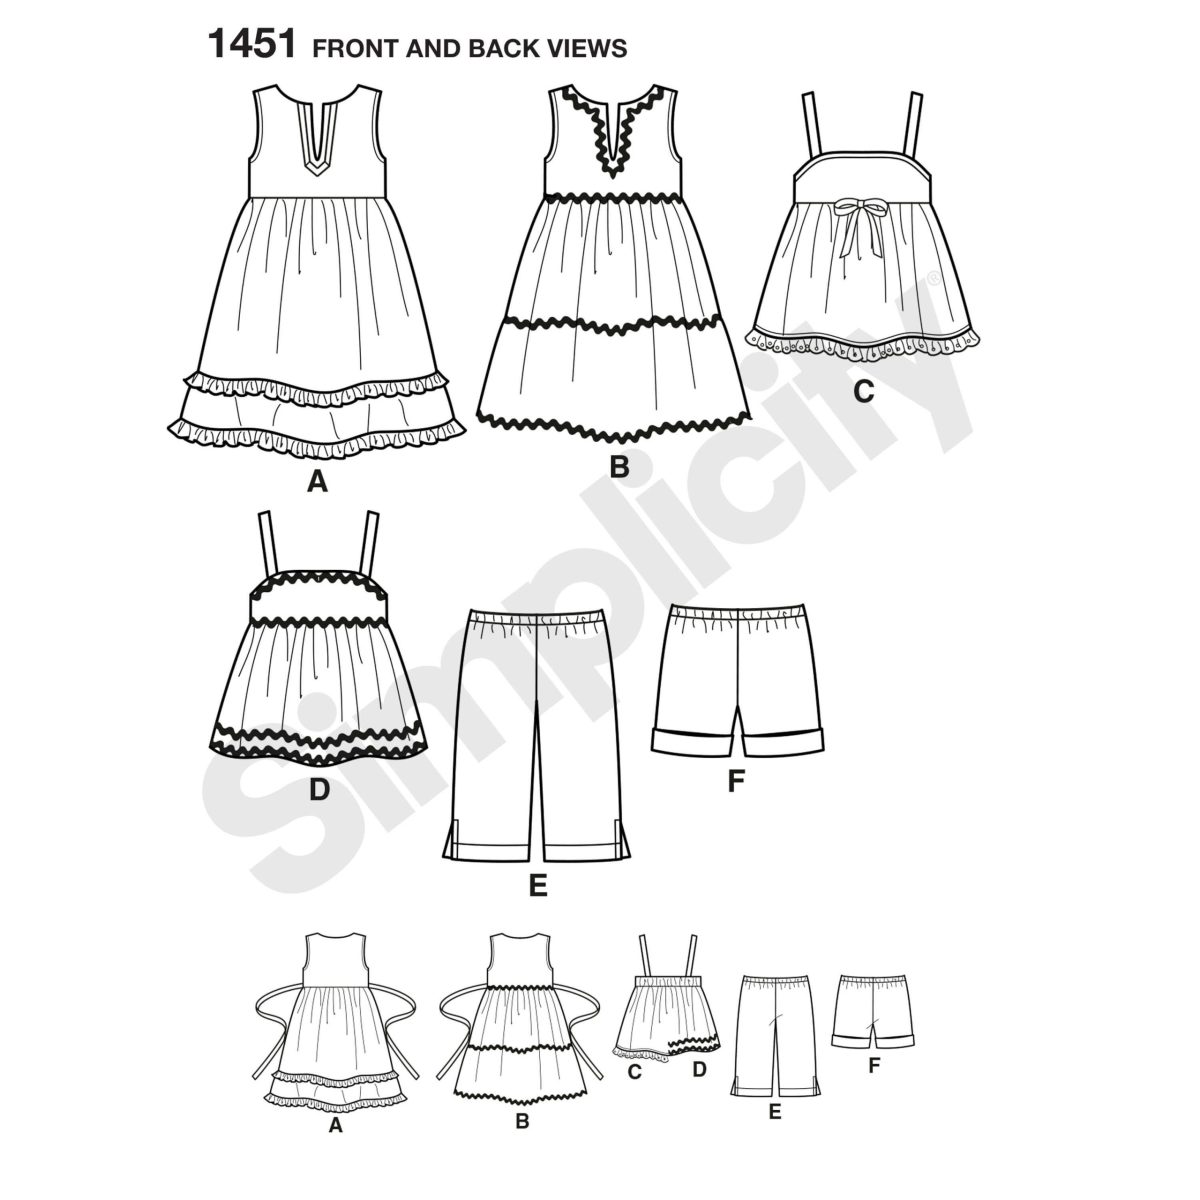 Simplicity Sewing Pattern 1451 Toddlers' Dresses, Top, Cropped Trousers and Shorts